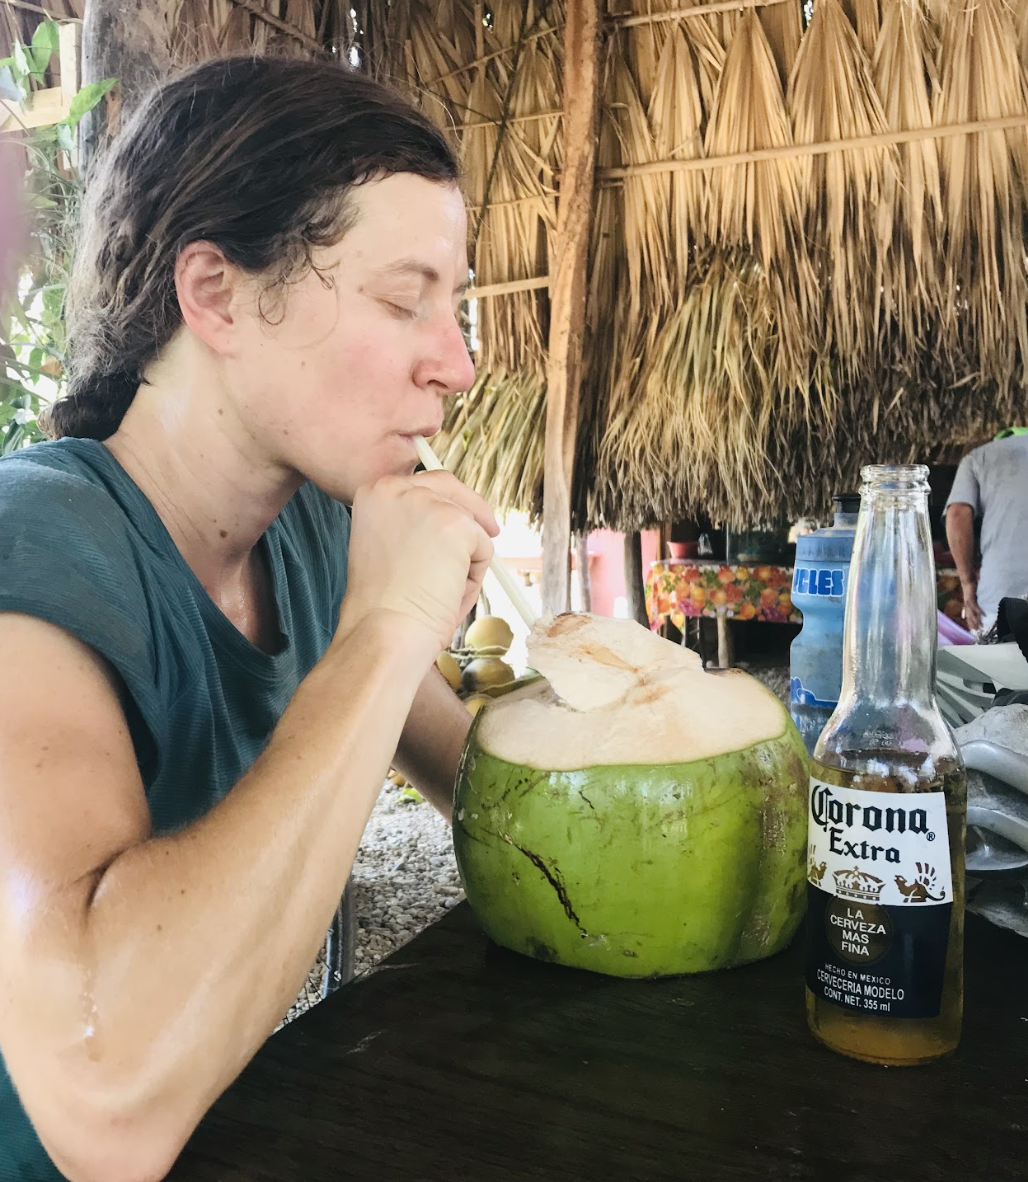 woman drinking from a coconut